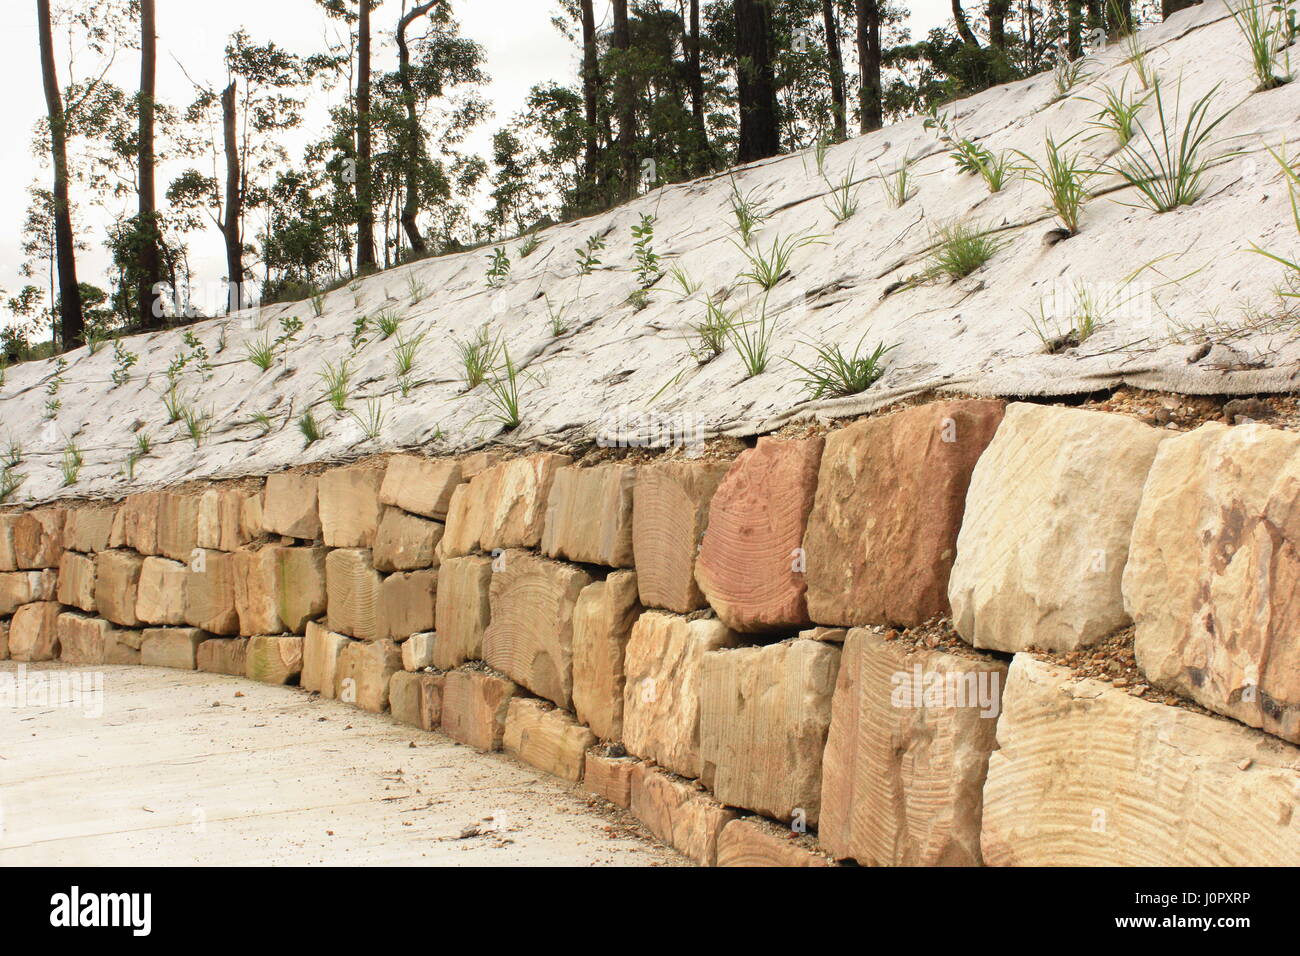 Sandstone retaining wall with native plants and erosion prevention cloth Stock Photo